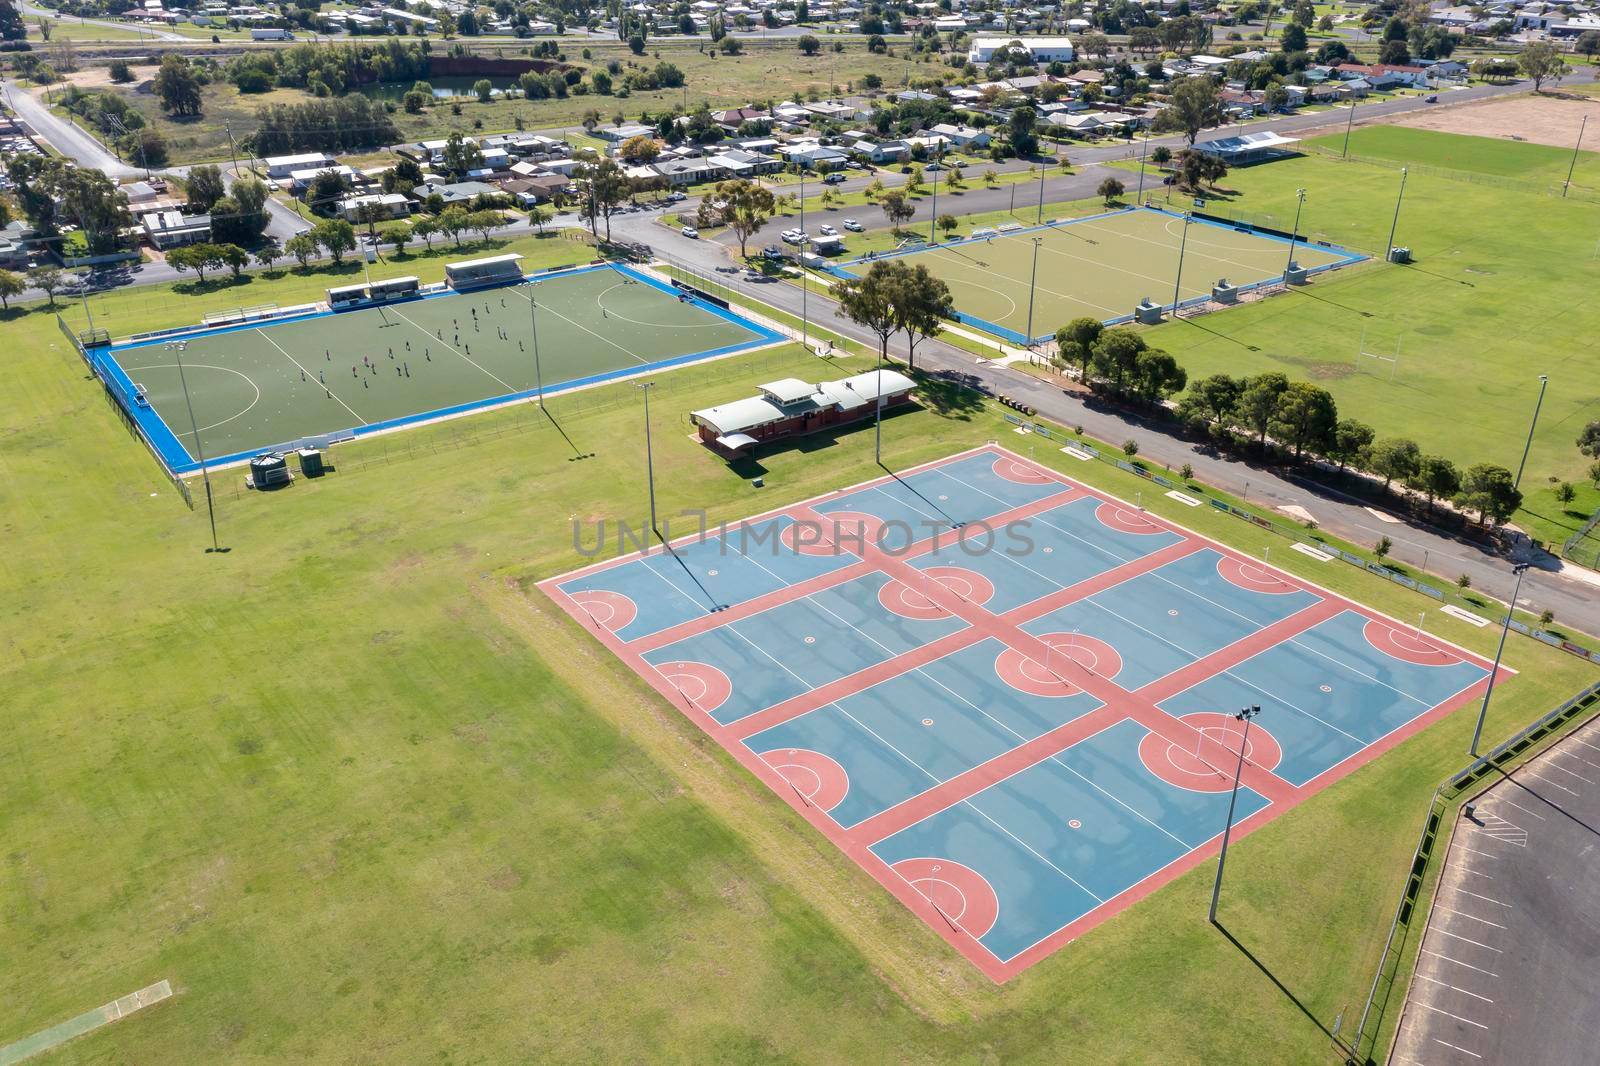 Drone aerial photograph of colourful netball courts by WittkePhotos